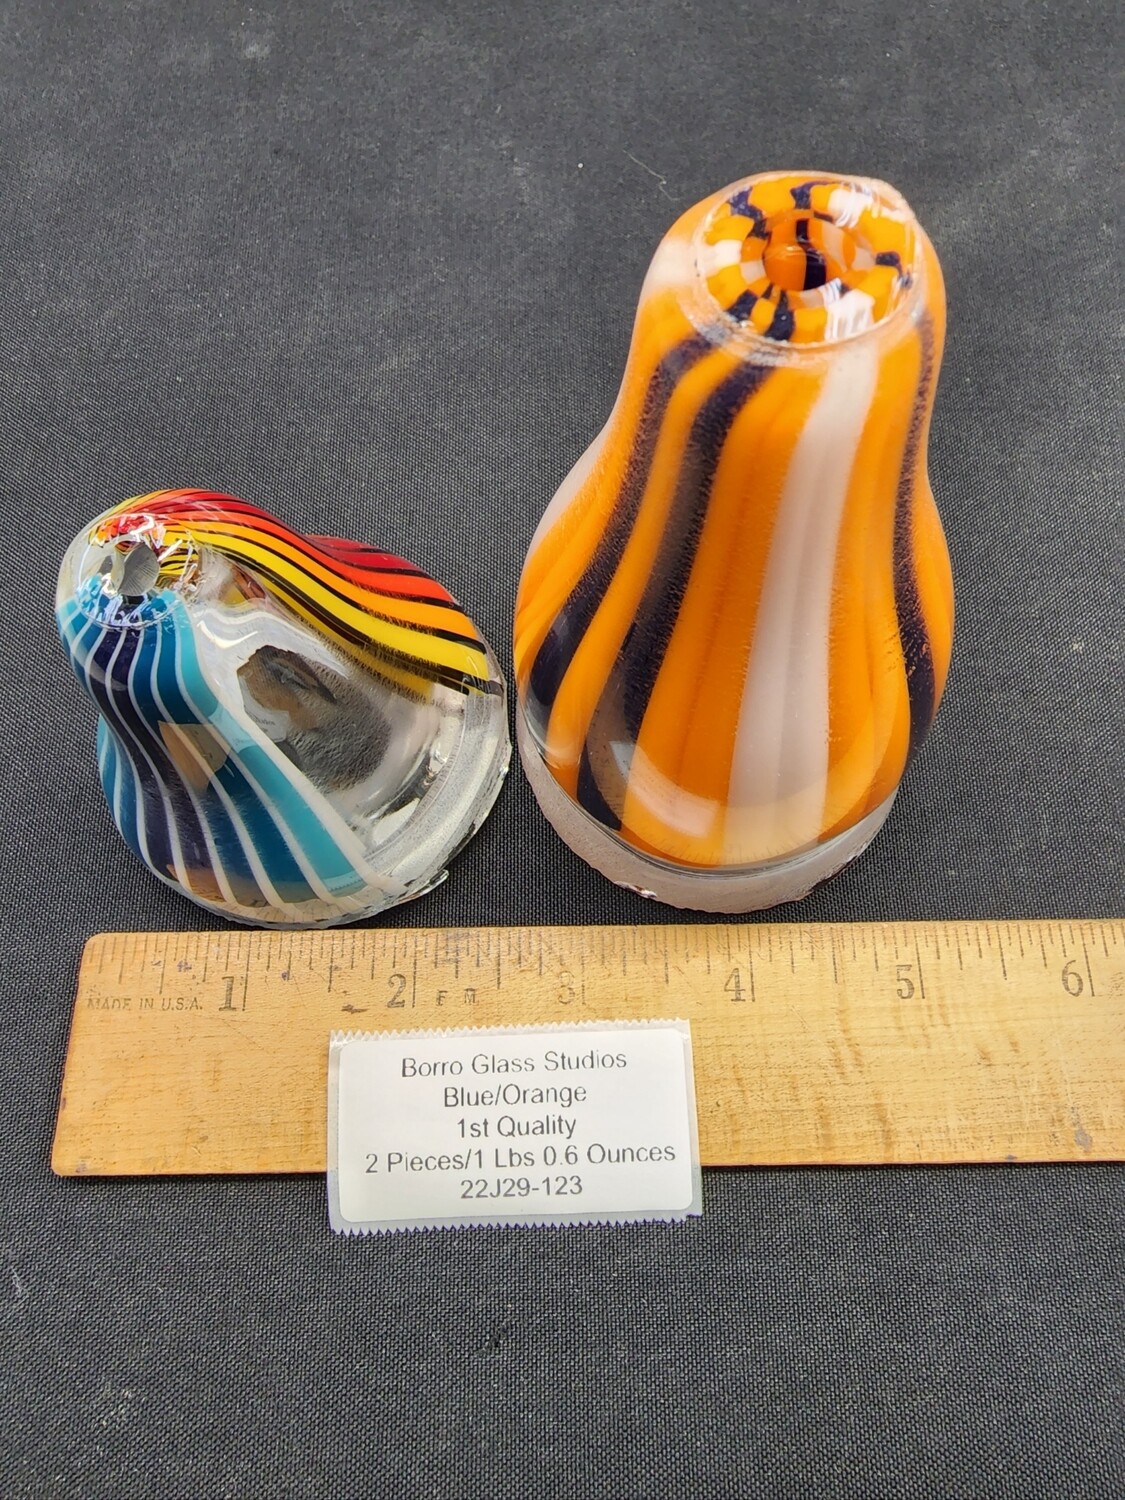 Blue/Orange and Fire & Ice w/Viewing Window Borro Glass Line Tubing Knuckle 1 Lbs 0.6 Ounces